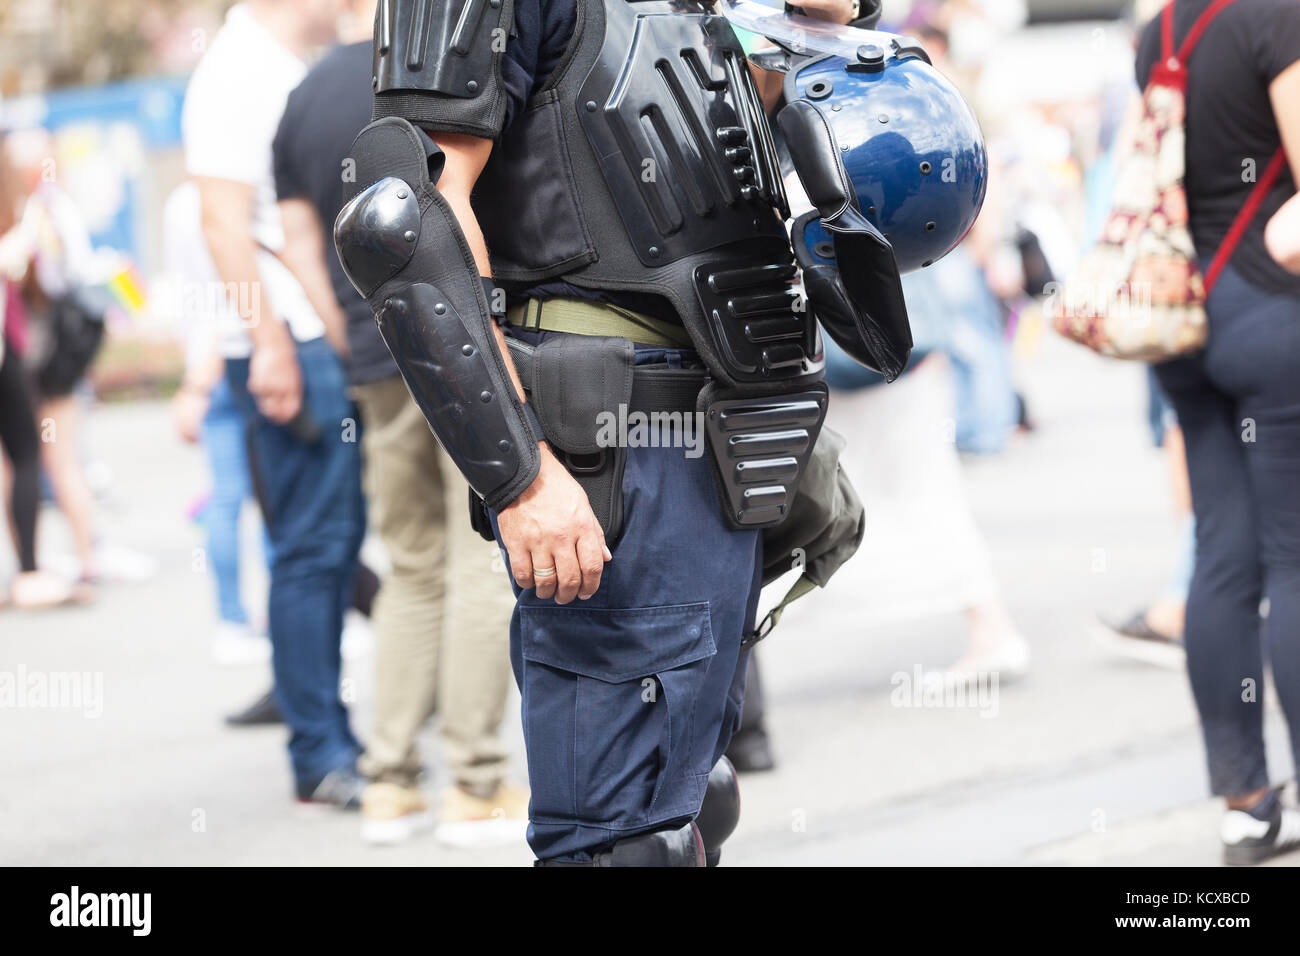 Police officer on duty. Law enforcement. Stock Photo